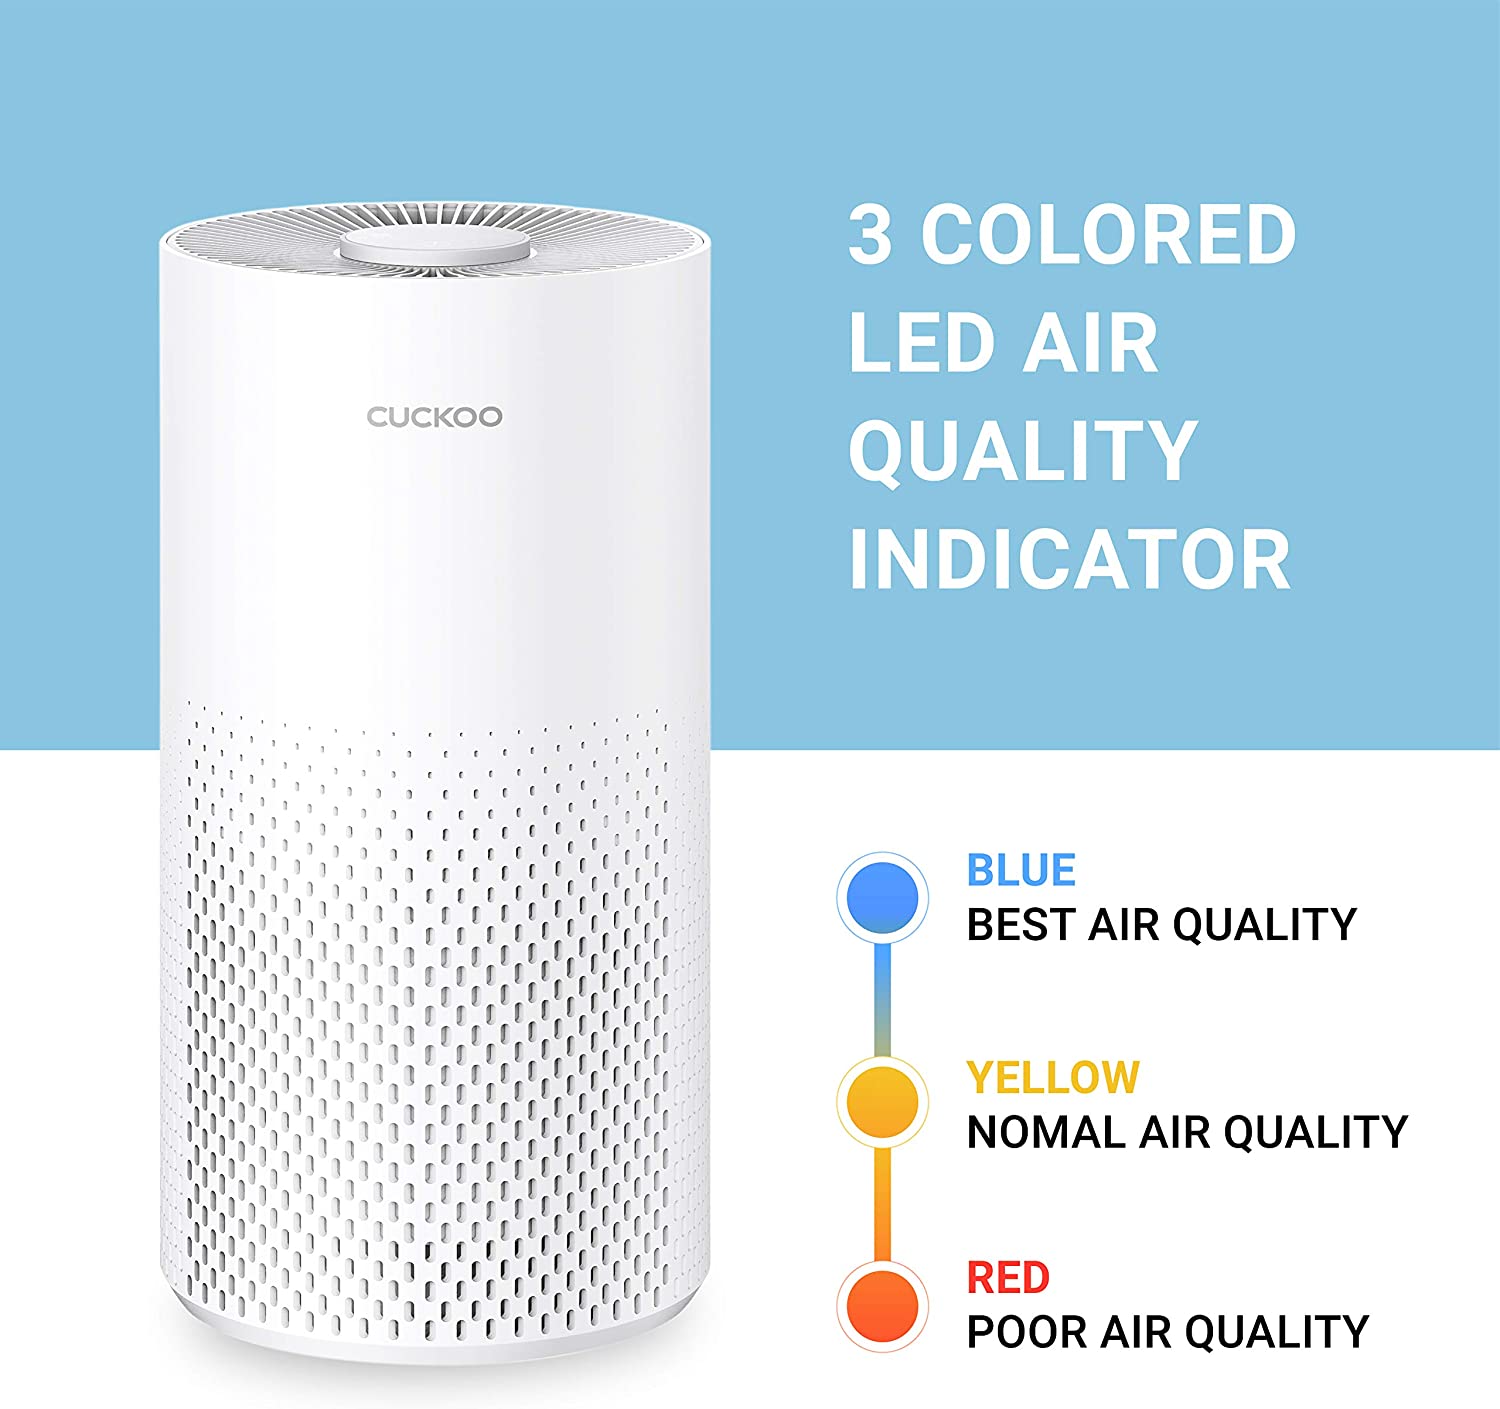 CUCKOO CAC-I0510FW Bundle, 3-Stage Air Purifier with Extra H13 True HEPA Filter, Removes Airborne Particles, For Small Rooms, White - image 5 of 11